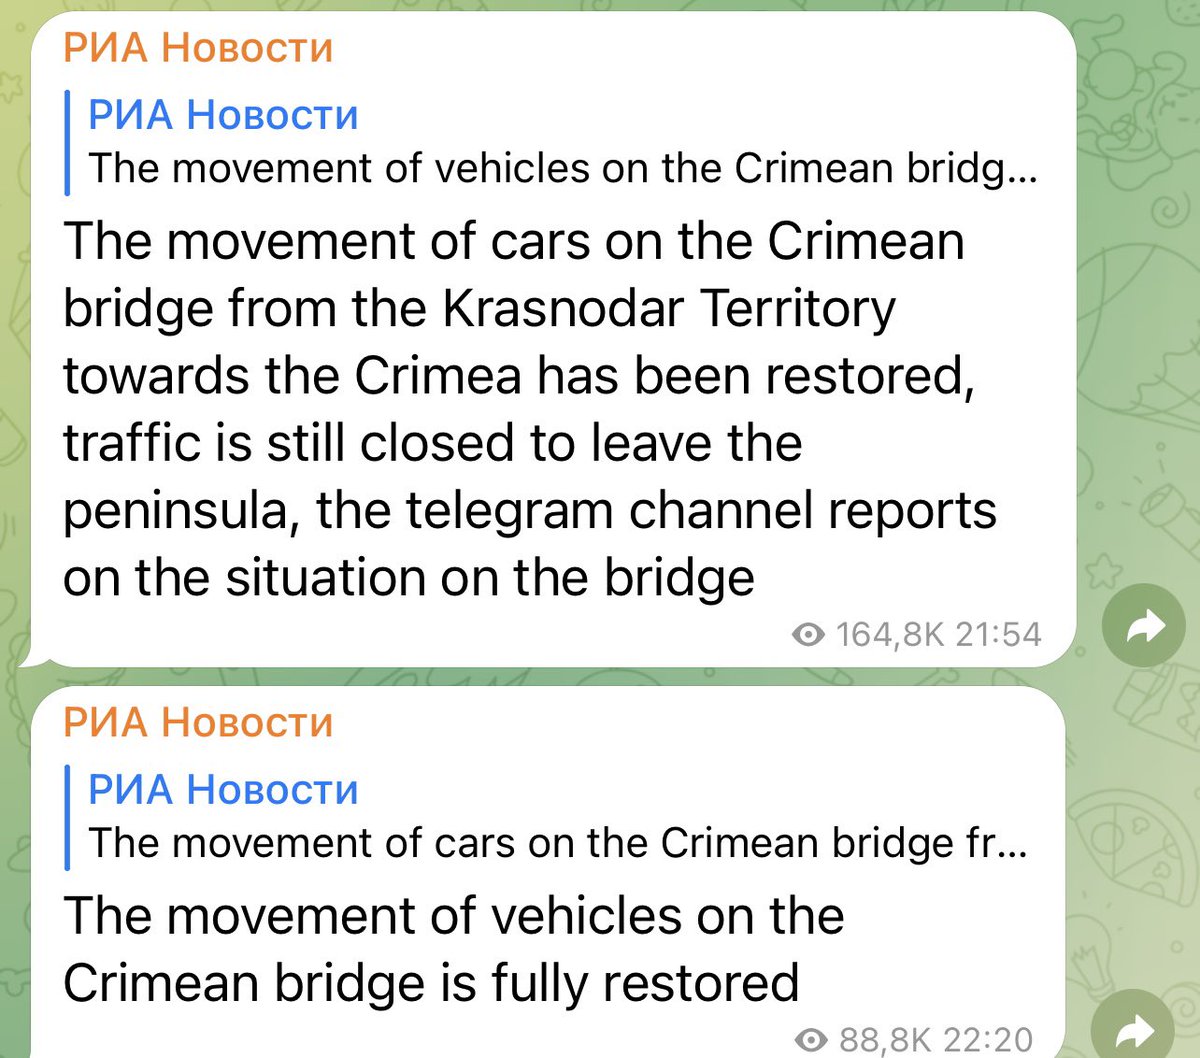 🤬It seems that since 22.20 cars can now get across the Kerch bridge. No words about the railroad section